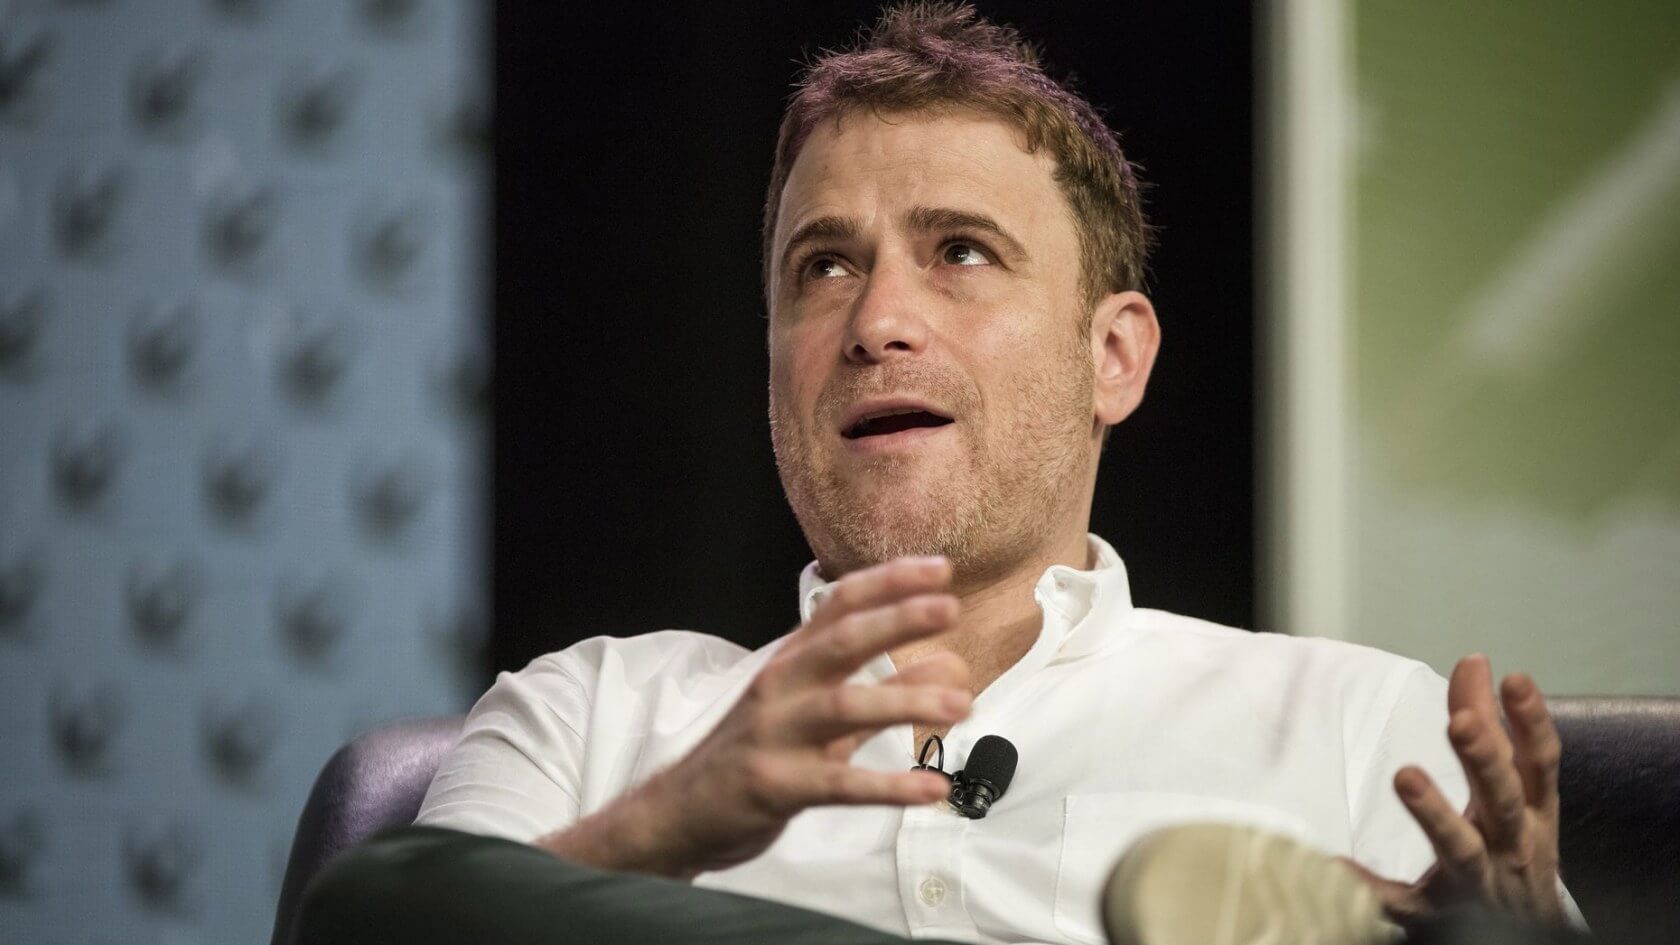 Slack has filed for a direct IPO